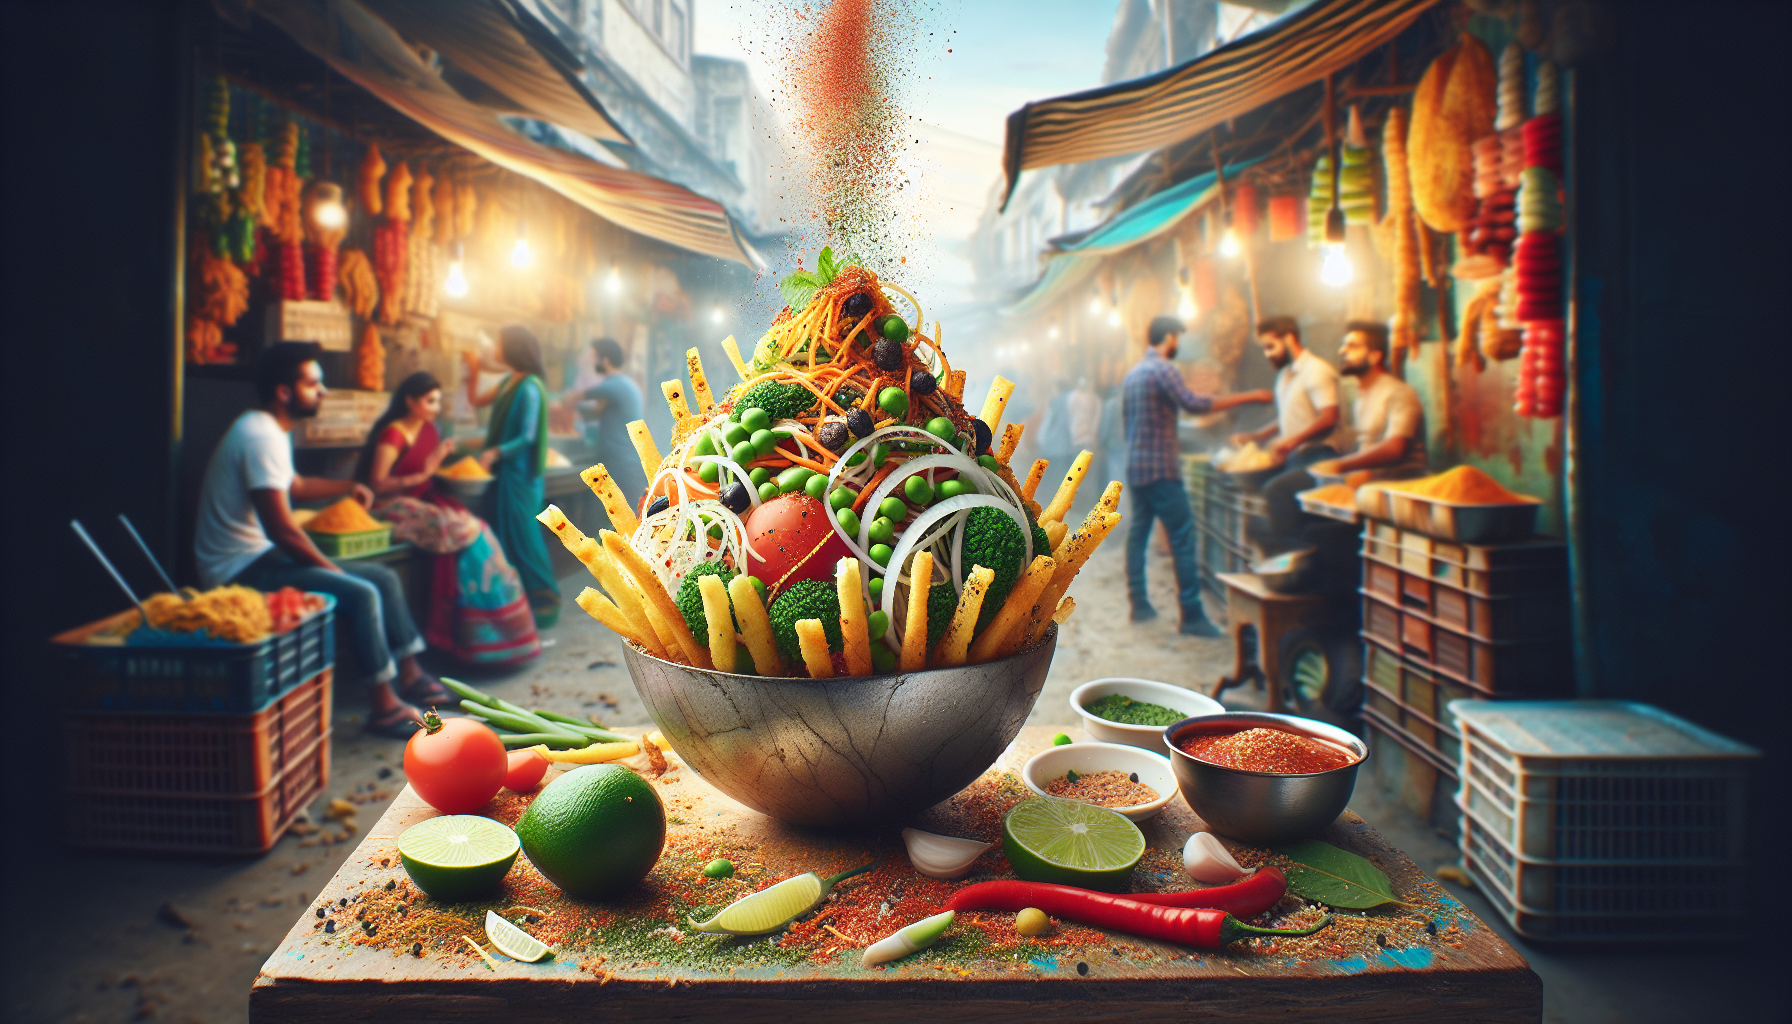 Share Your Healthy Take On A Classic Indian Street Food Snack.